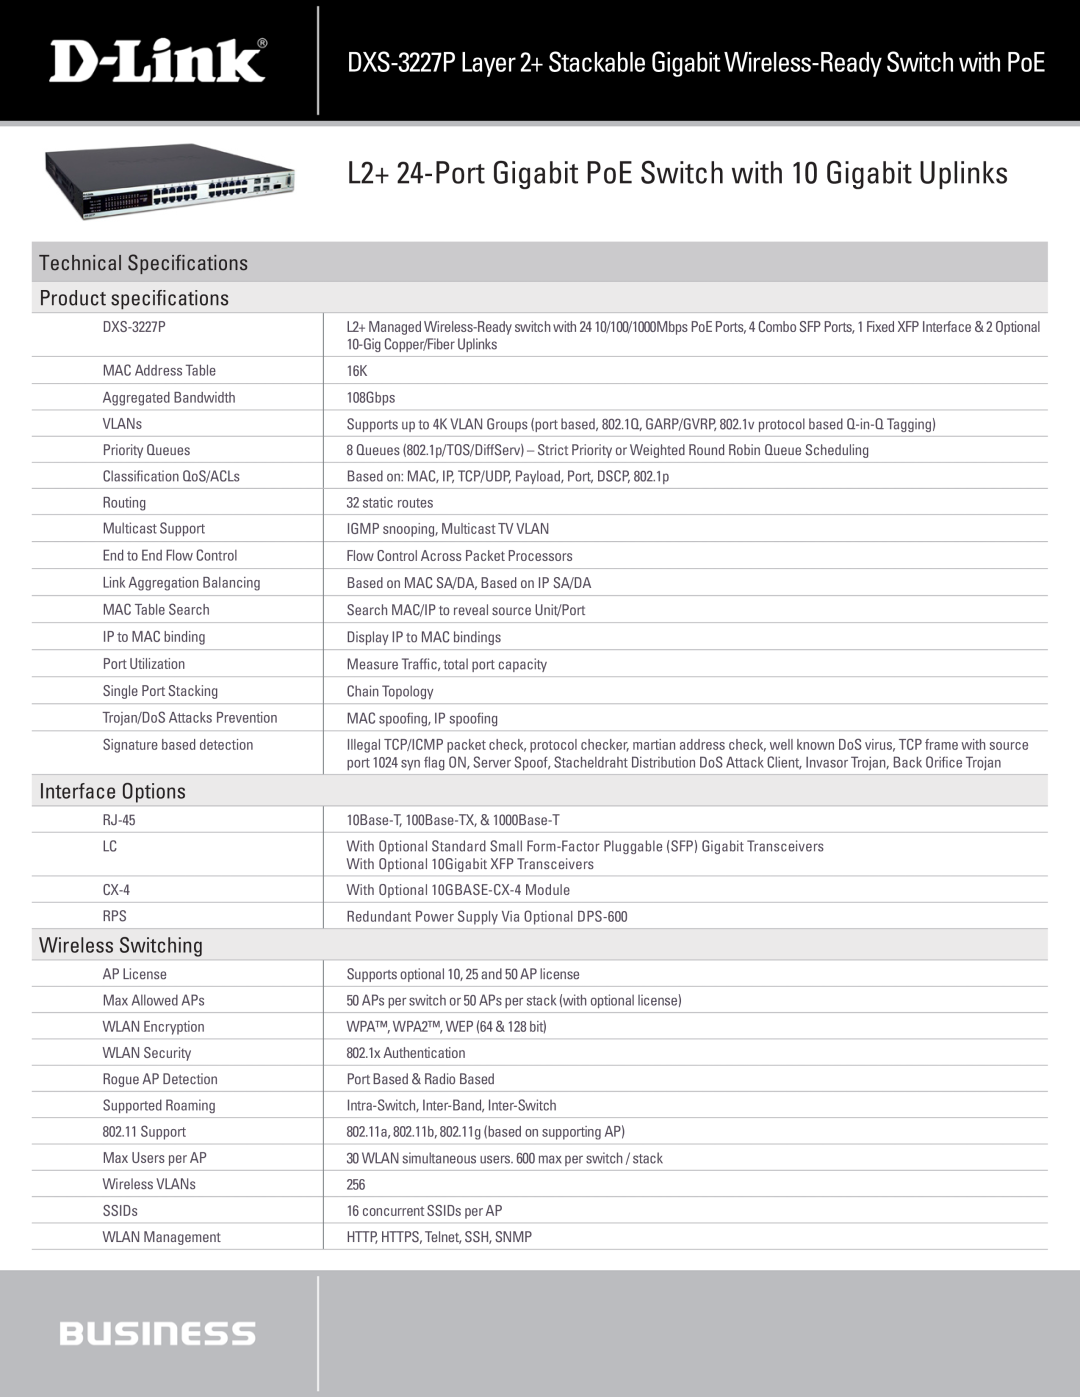 D-Link DXS-3227P L2+ 24-Port Gigabit PoE Switch with 10 Gigabit Uplinks, Wireless Switching, Technical Specifications 